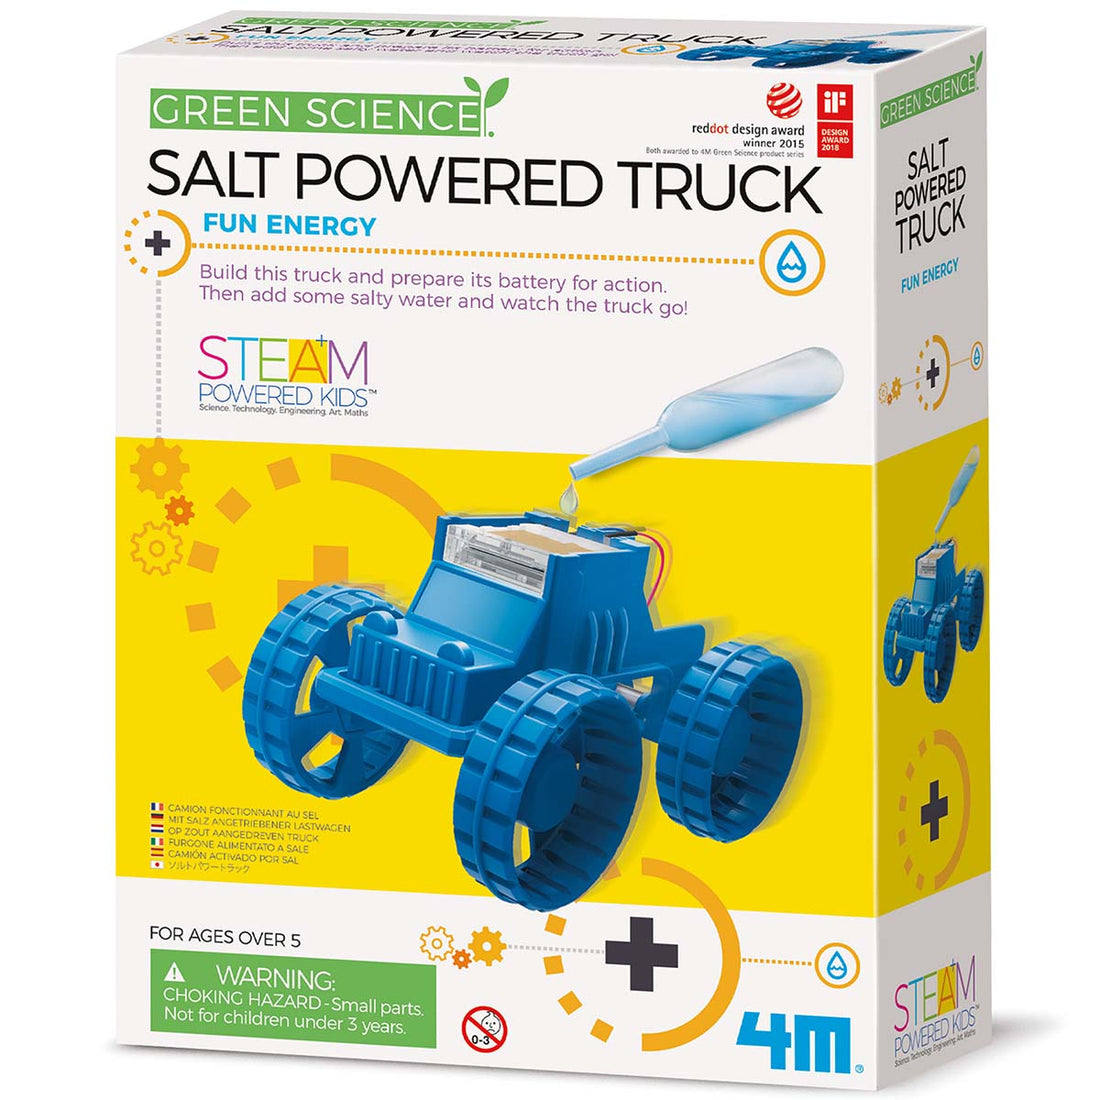 Green Science / Vehicle Operated in Salt